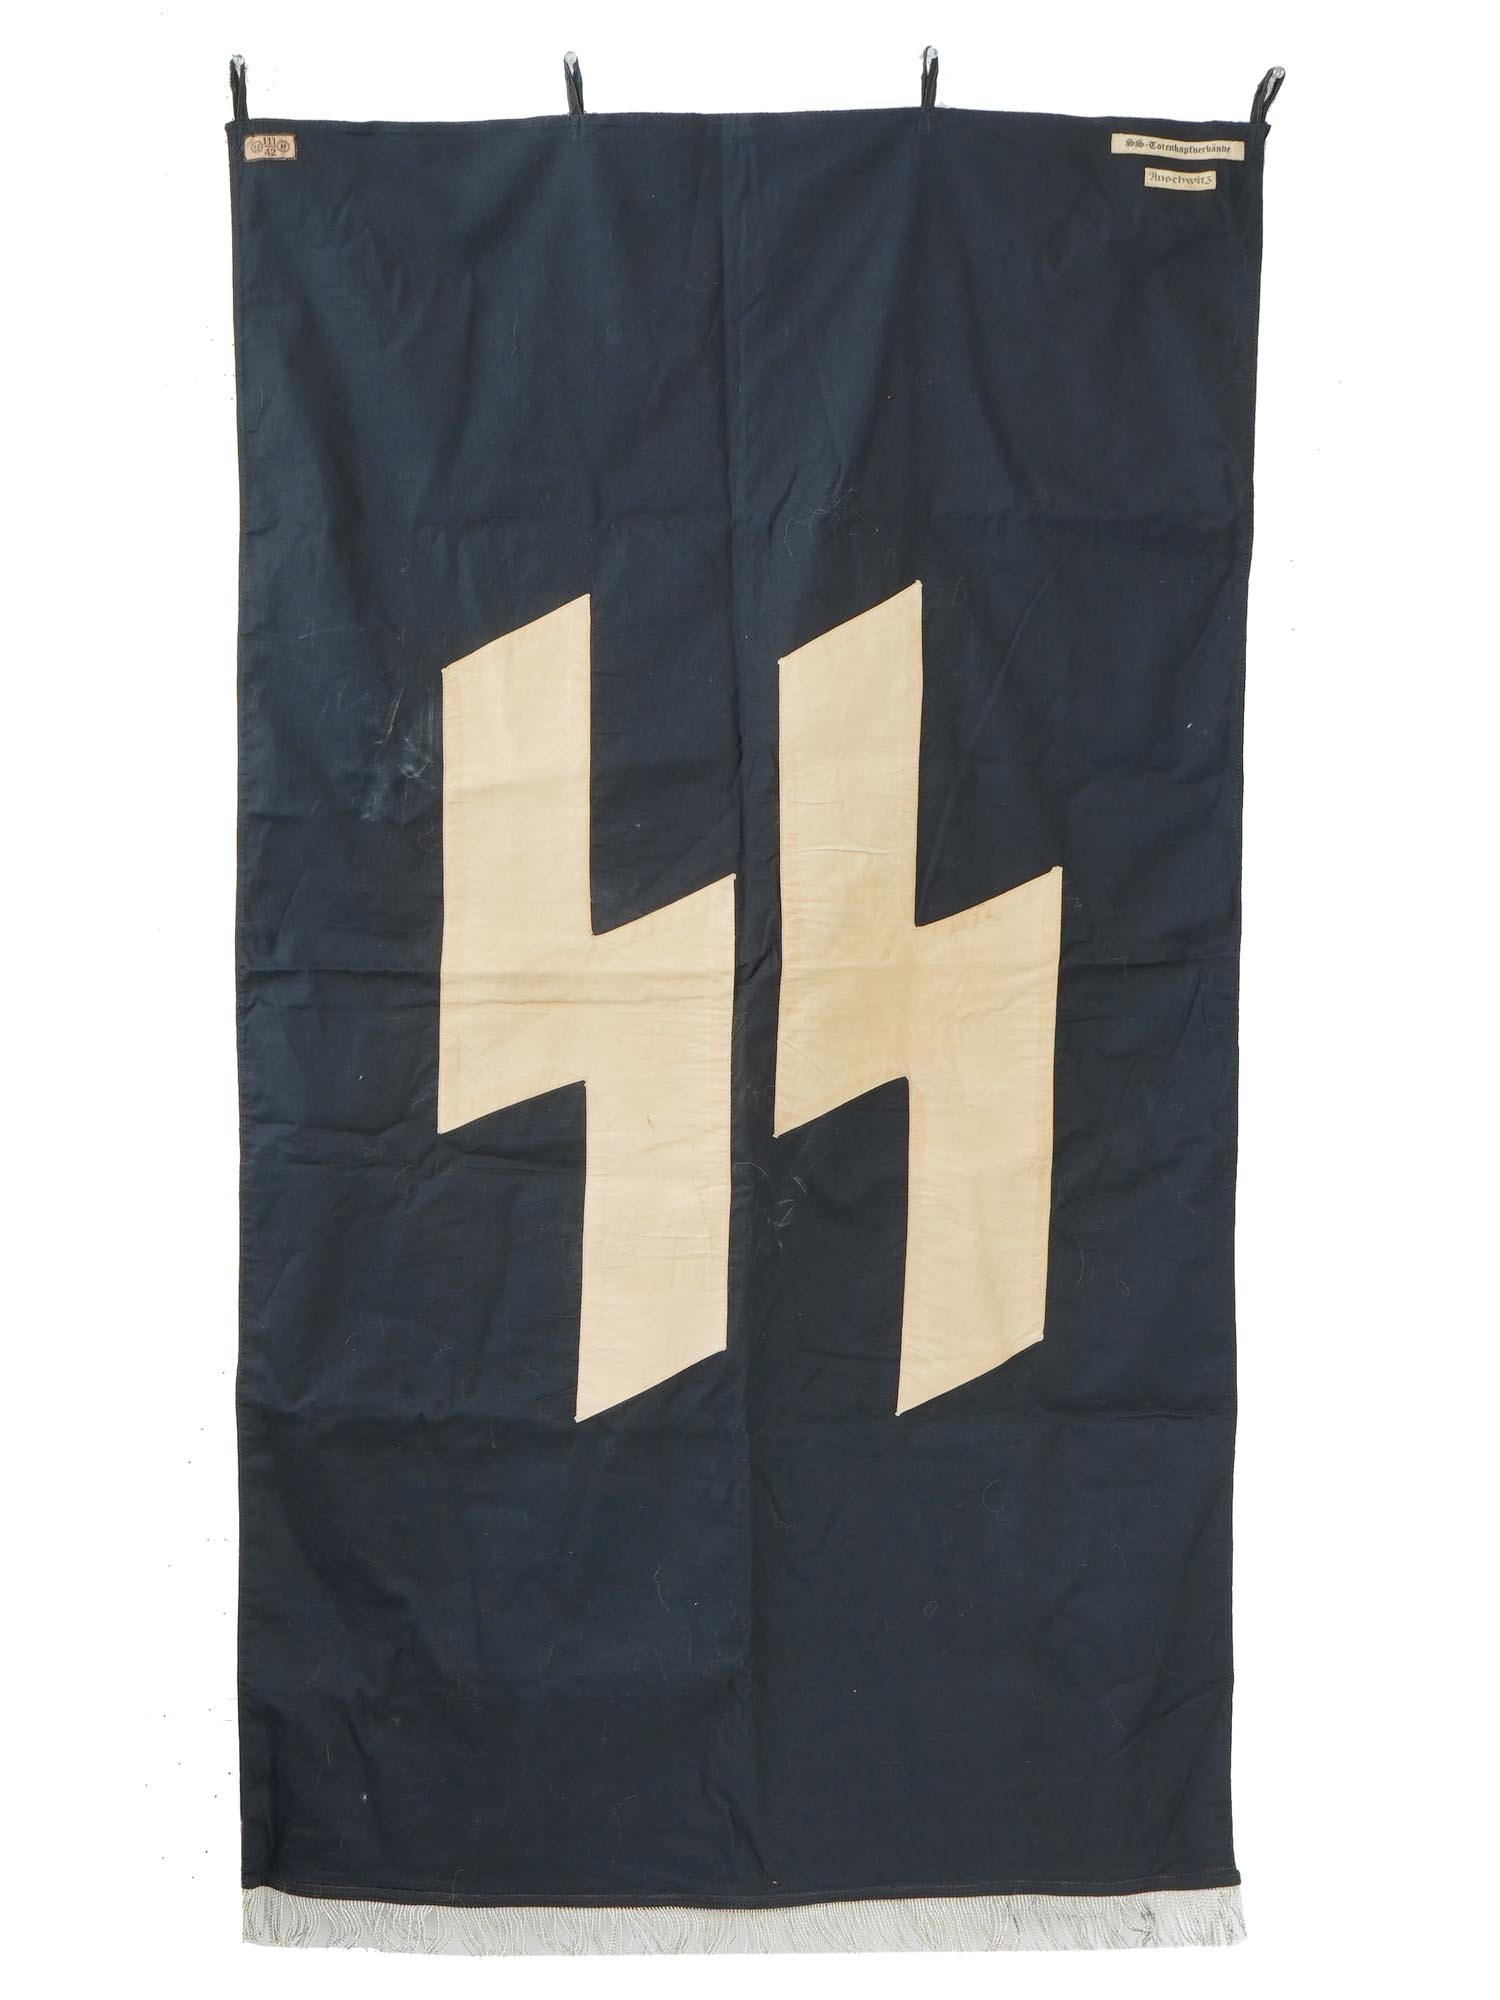 CONCENTRATION CAMP AUSCHWITZ SS TRUMPET BANNER PIC-0